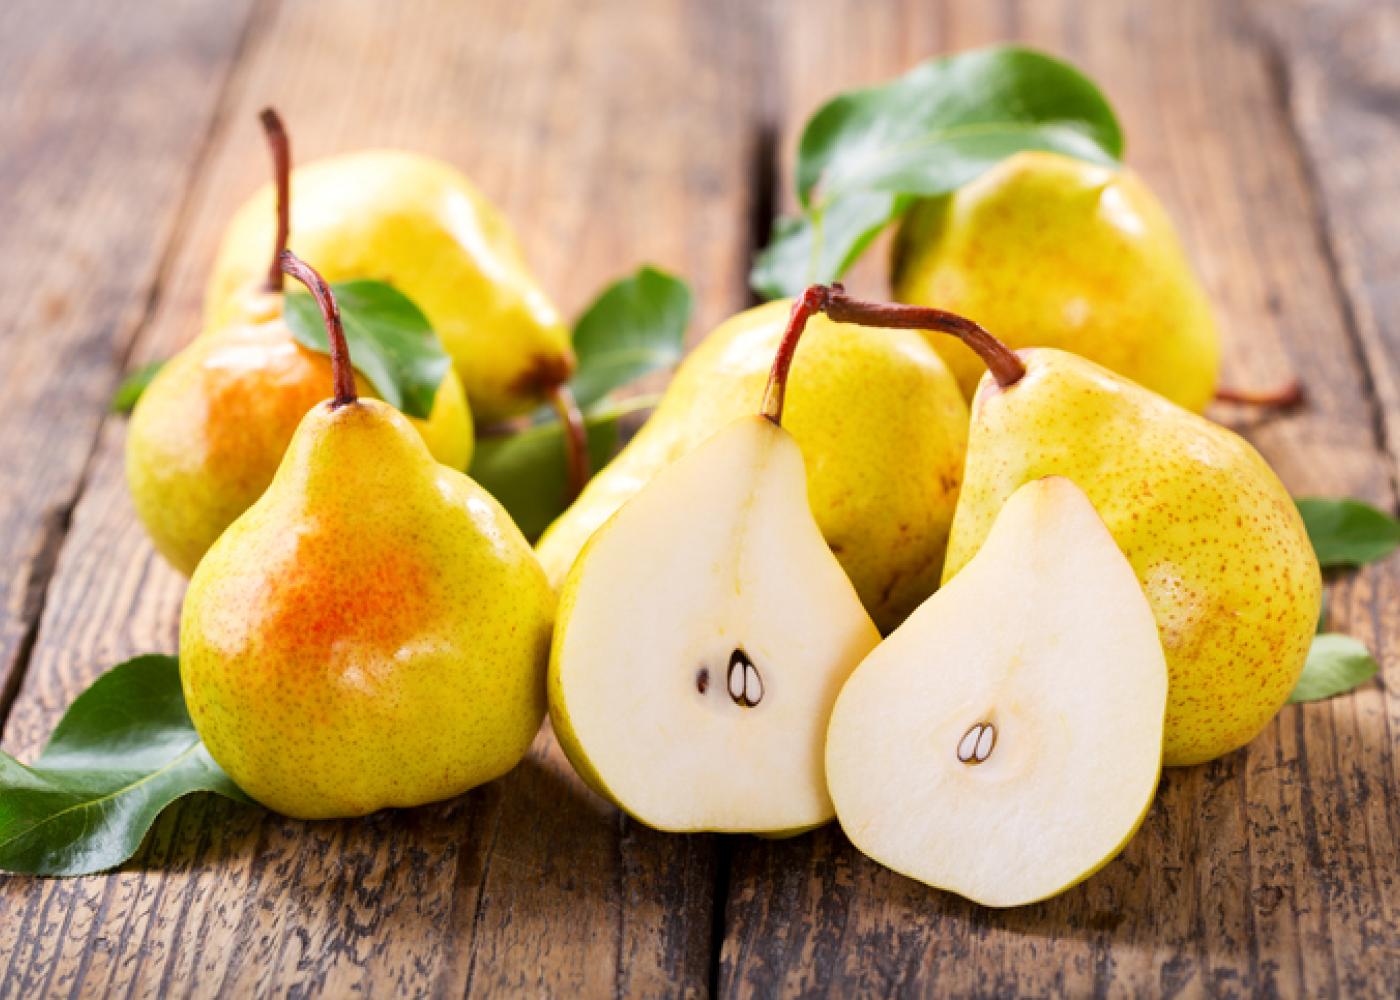 Sliced pears for guinea pigs to eat